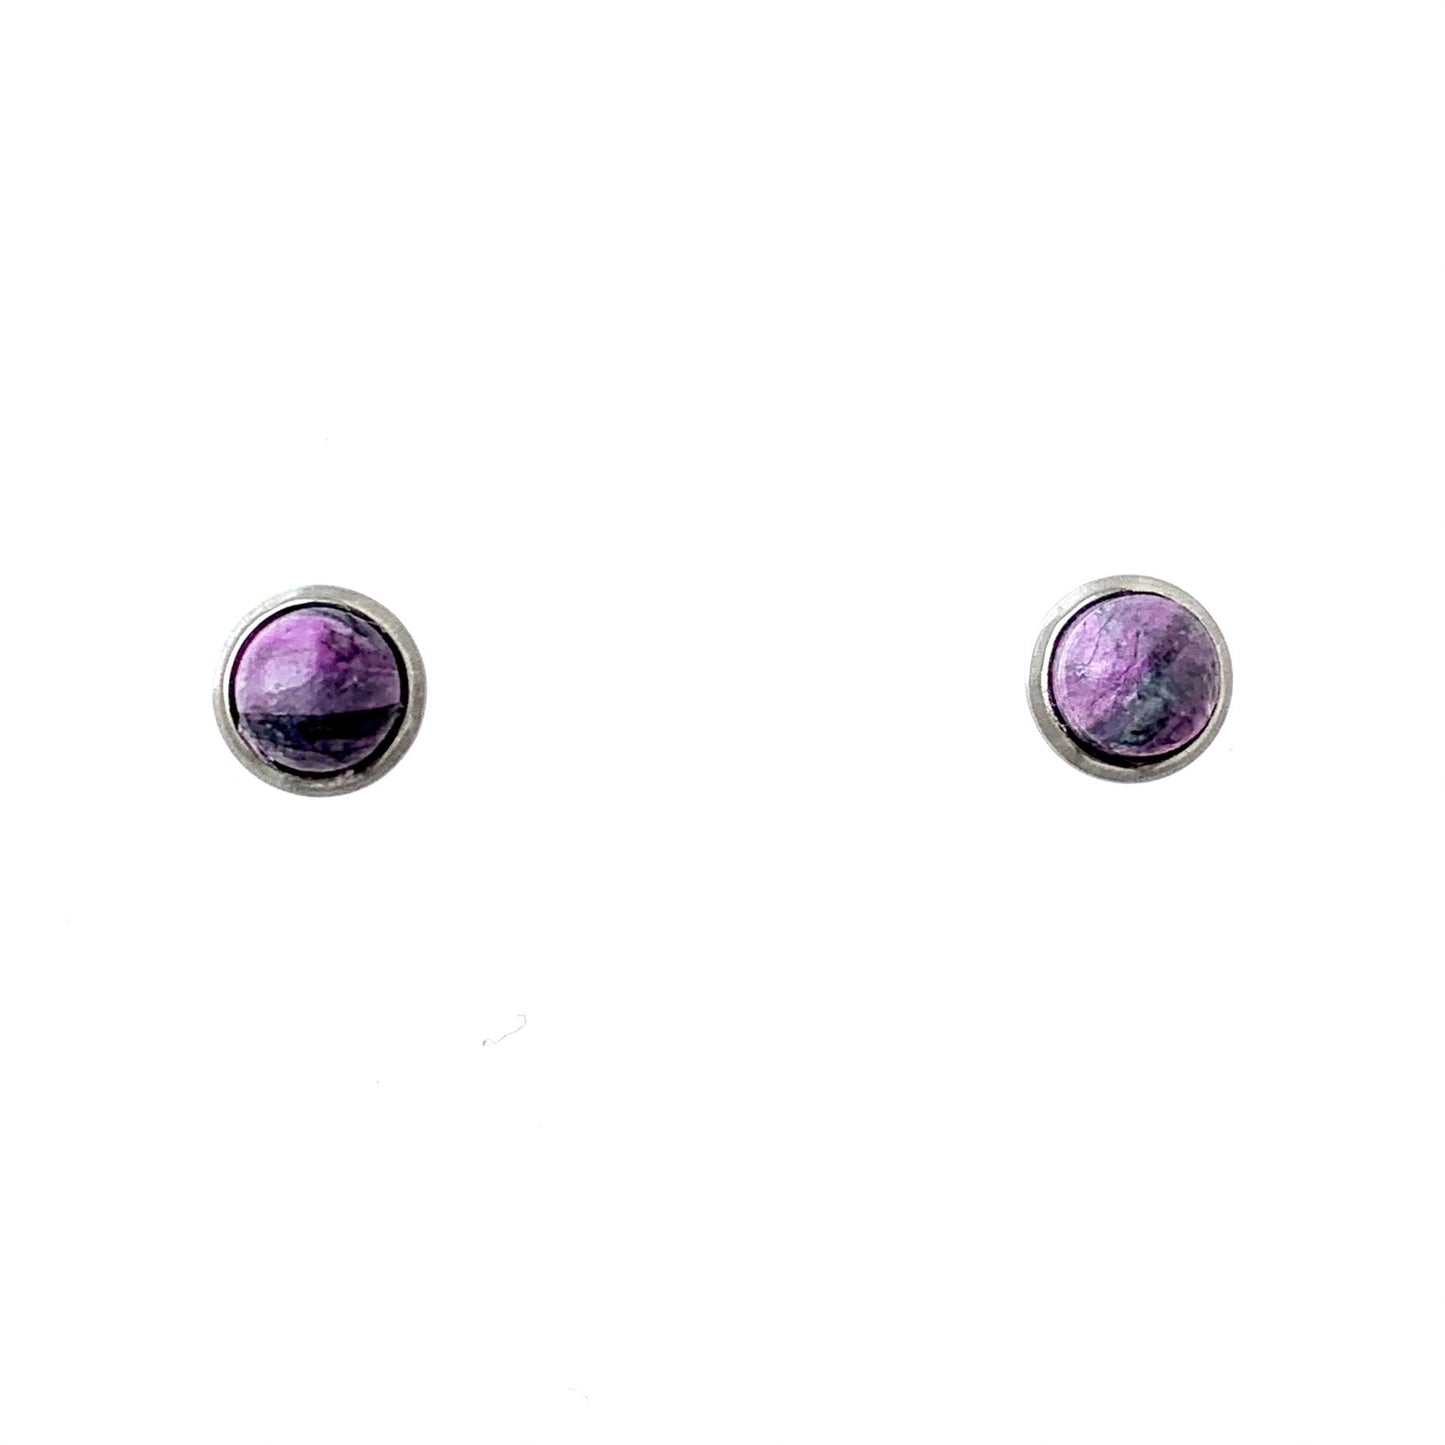 Small purple studs handmade from recycled plastic